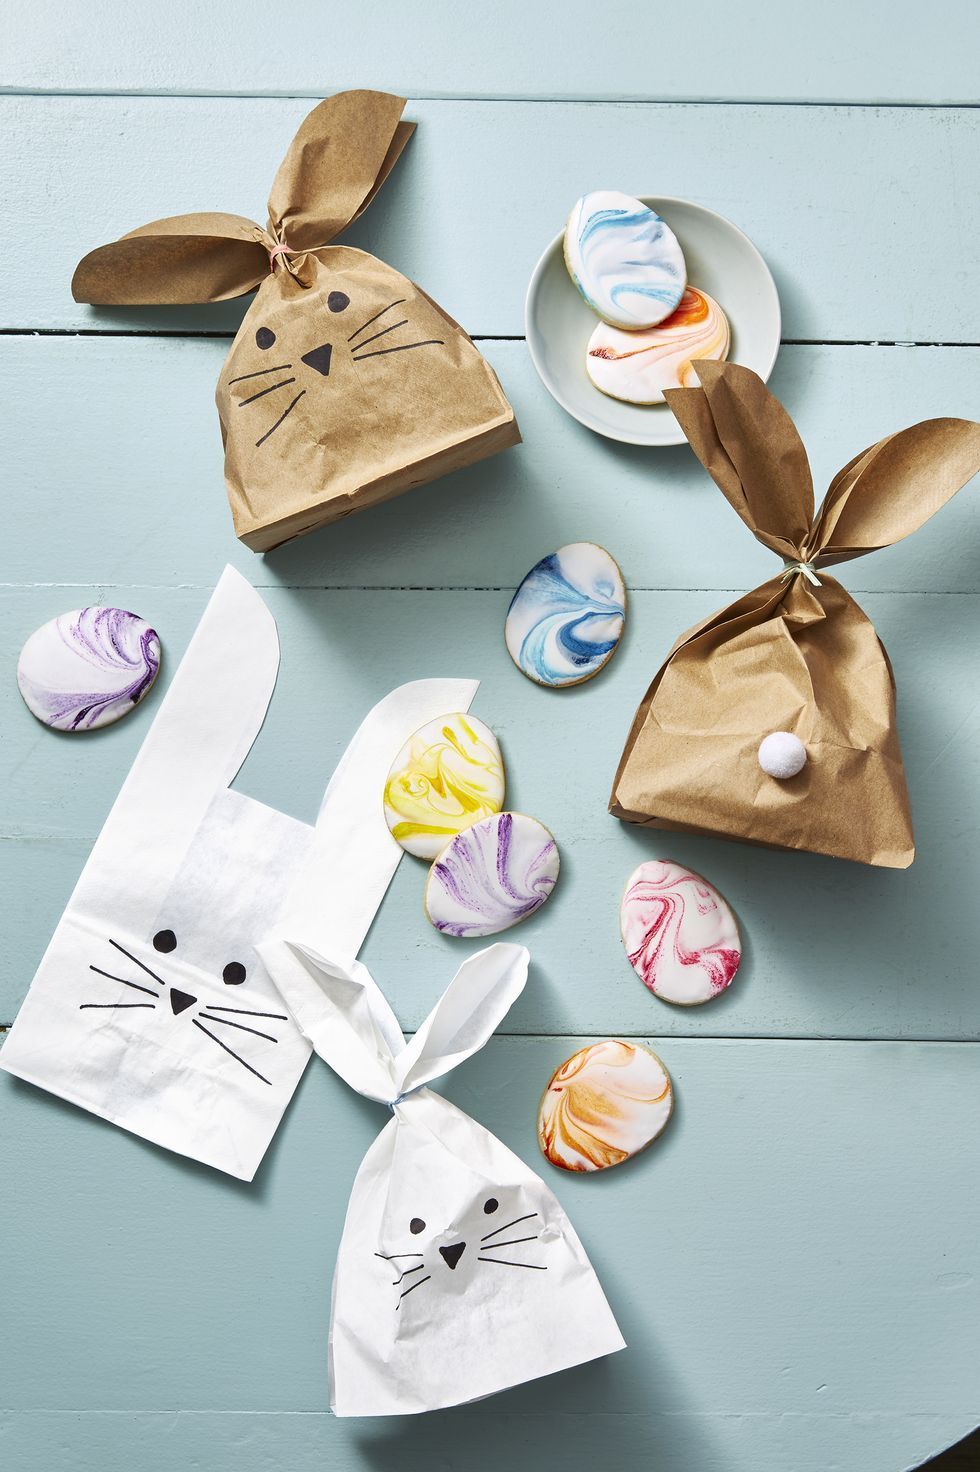 Grabease Creative Easter Crafts and Activities for the Family